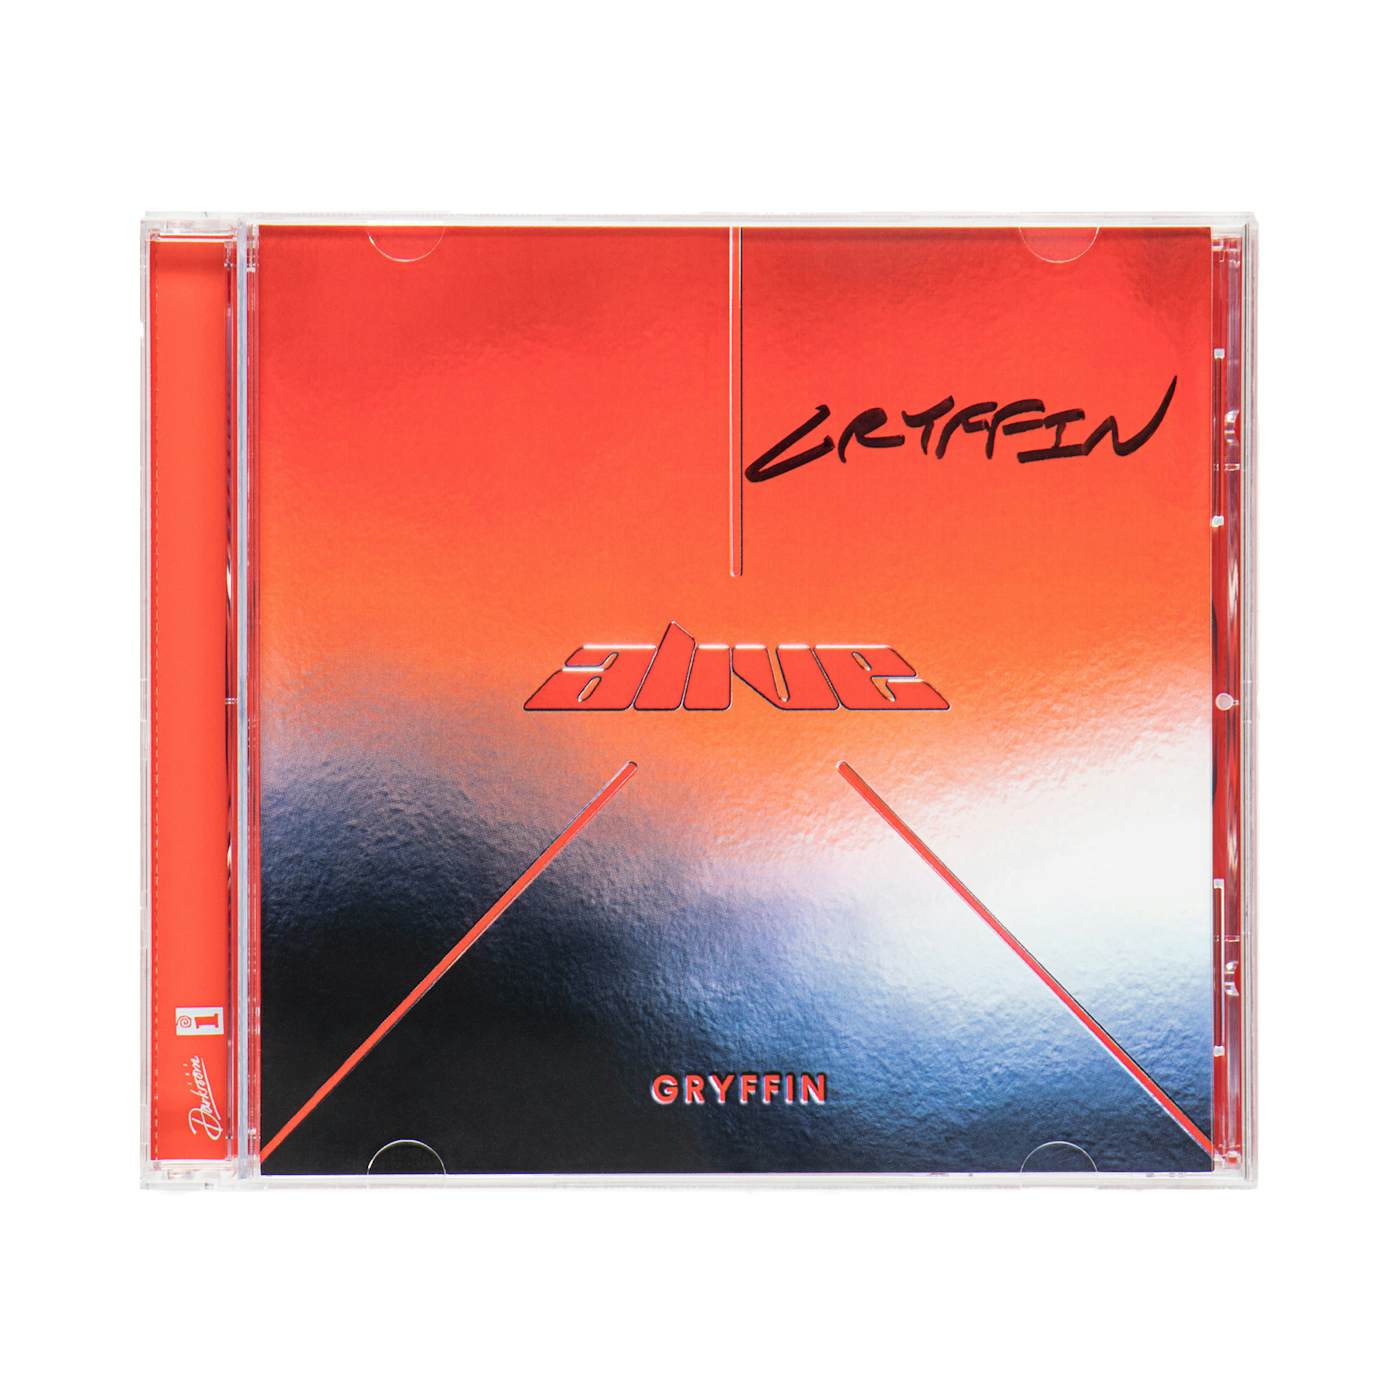 Alive CD - Signed by Gryffin